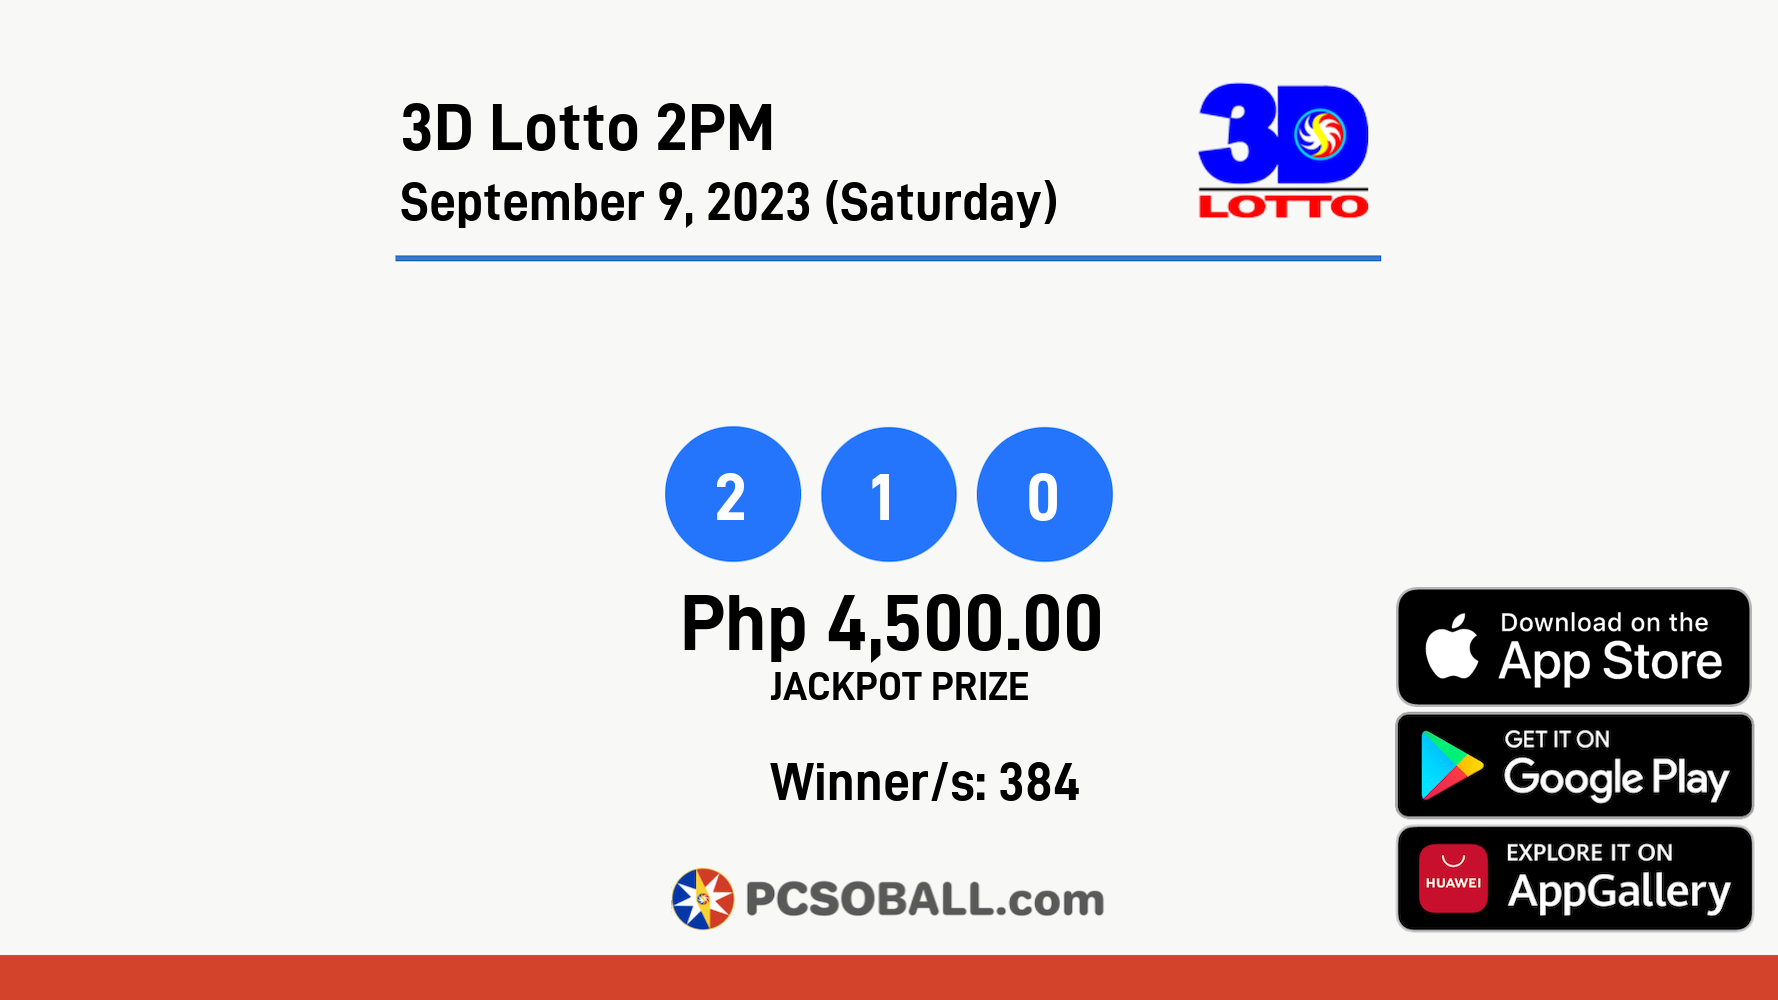 3D Lotto 2PM September 9, 2023 (Saturday) Result